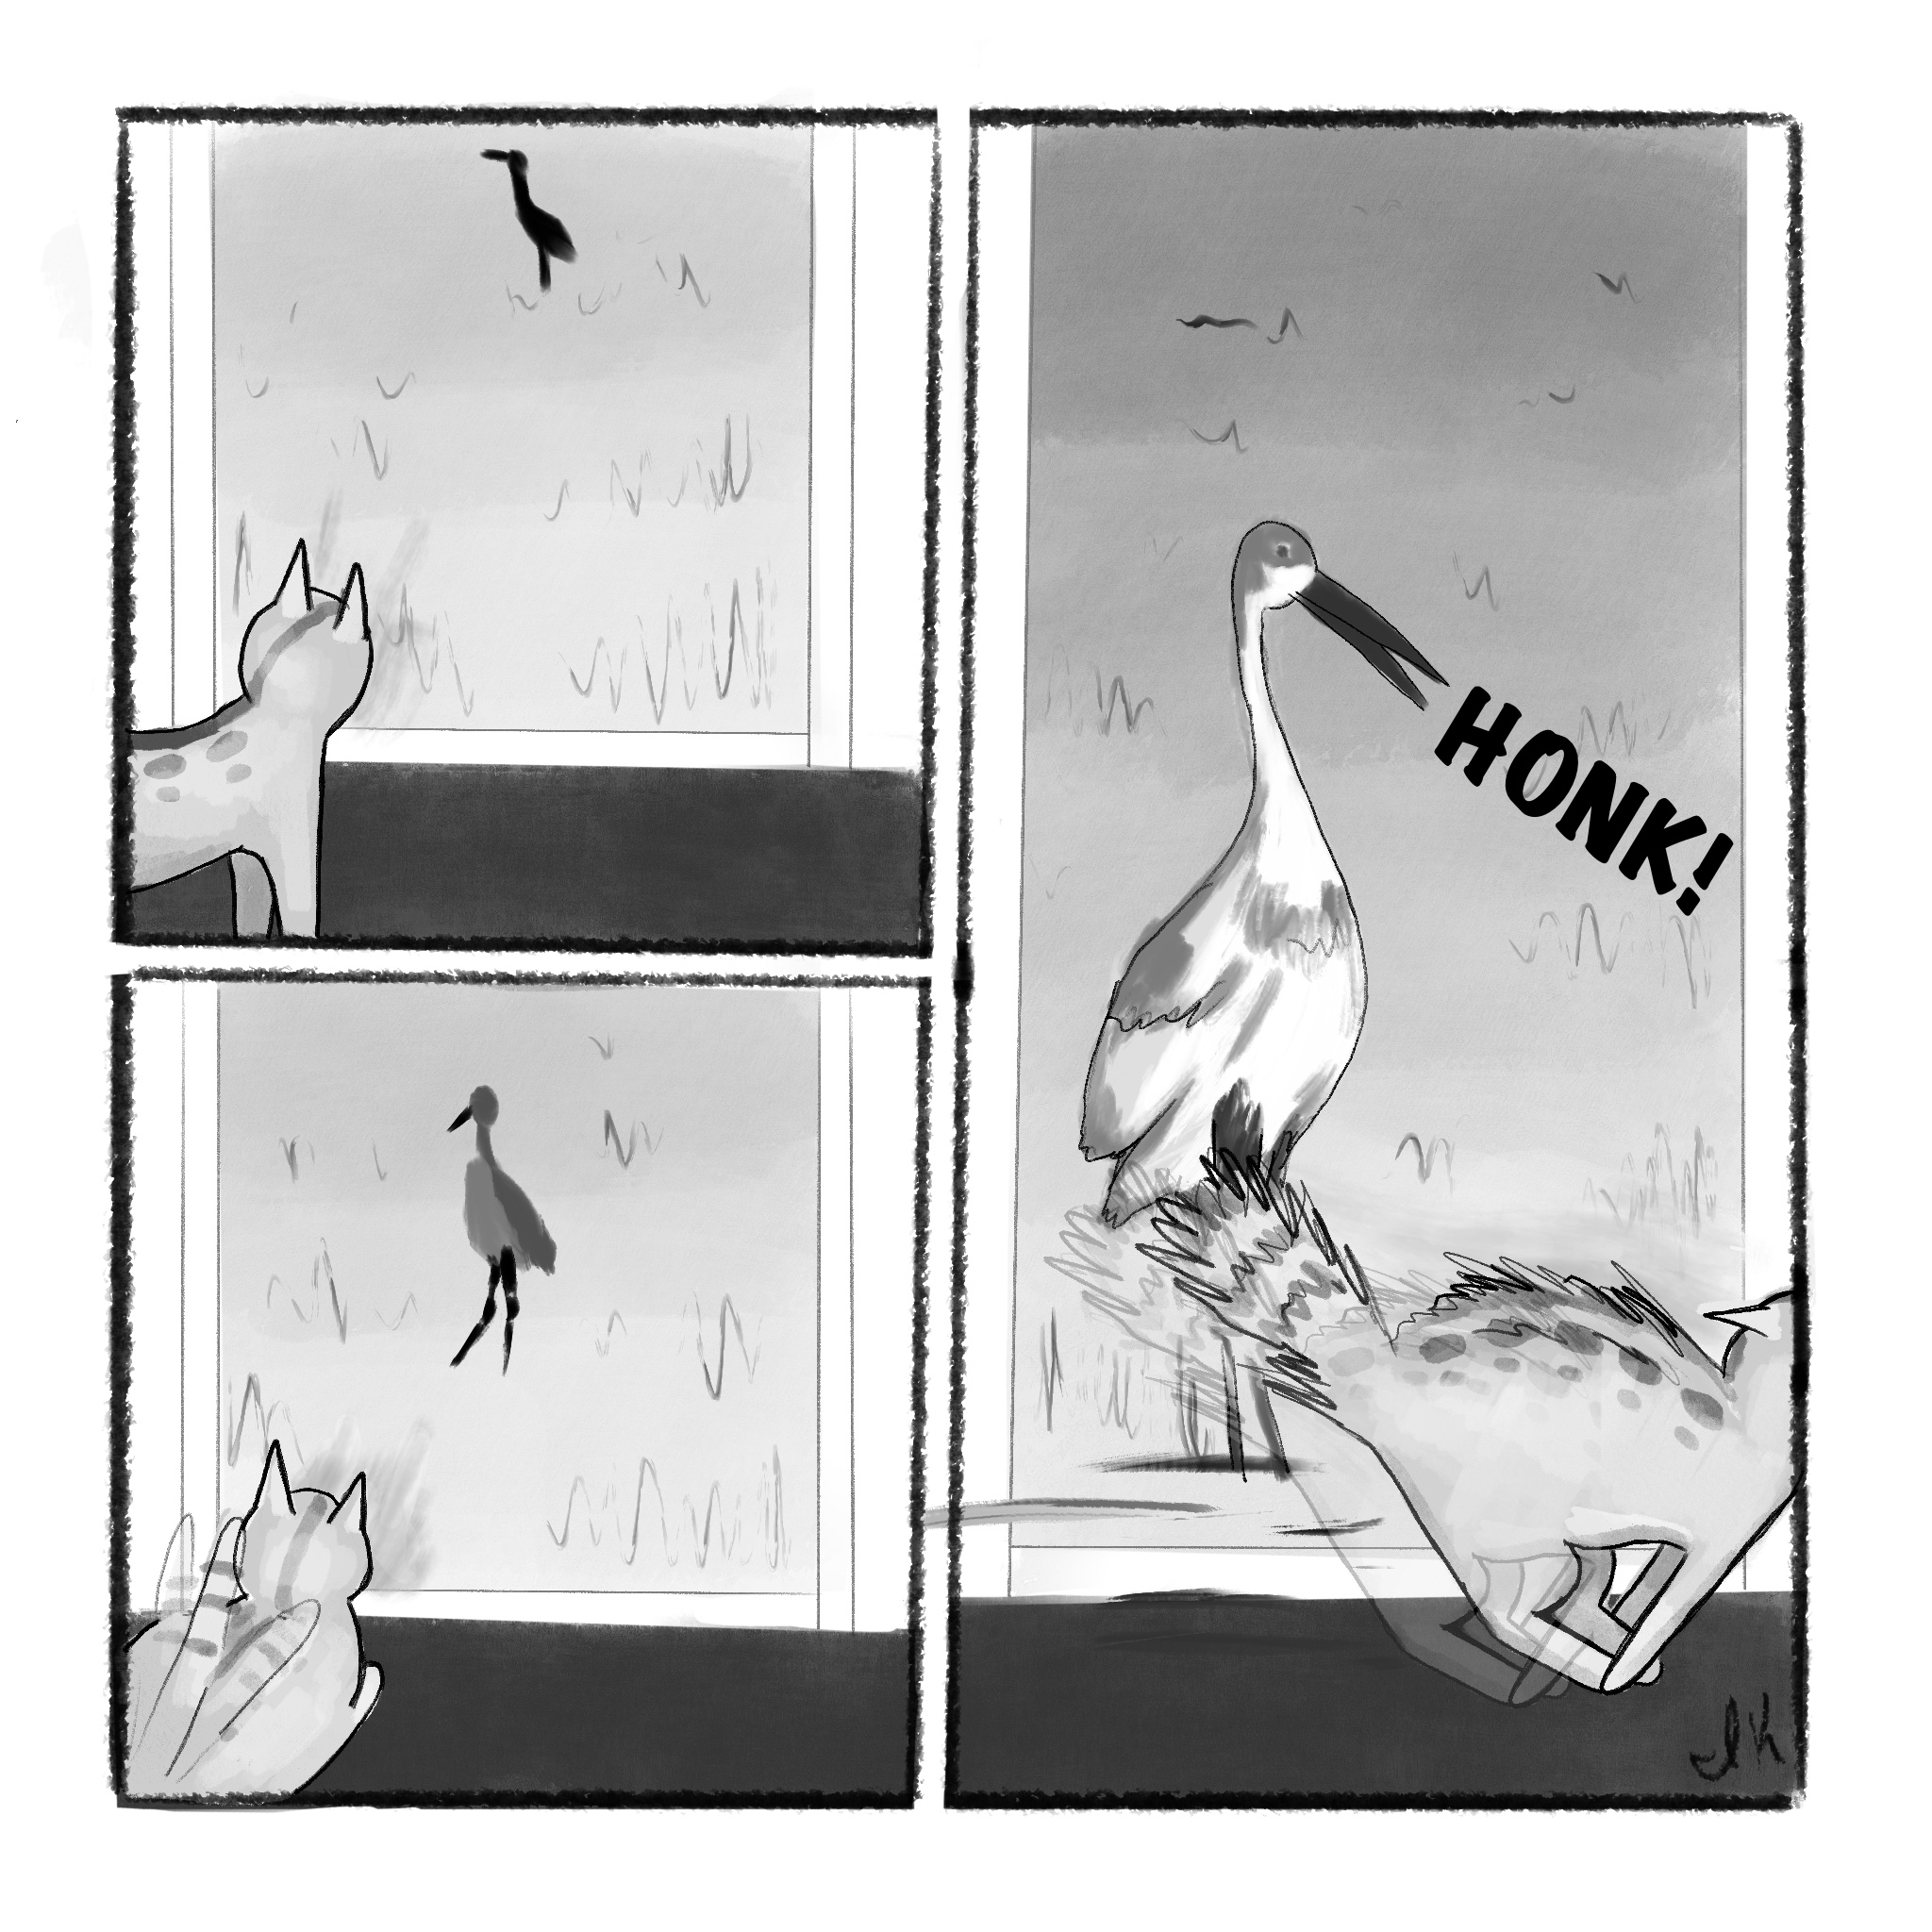 Comic of a cat looking out a window at a bird, bird says "honk" and cat runs away